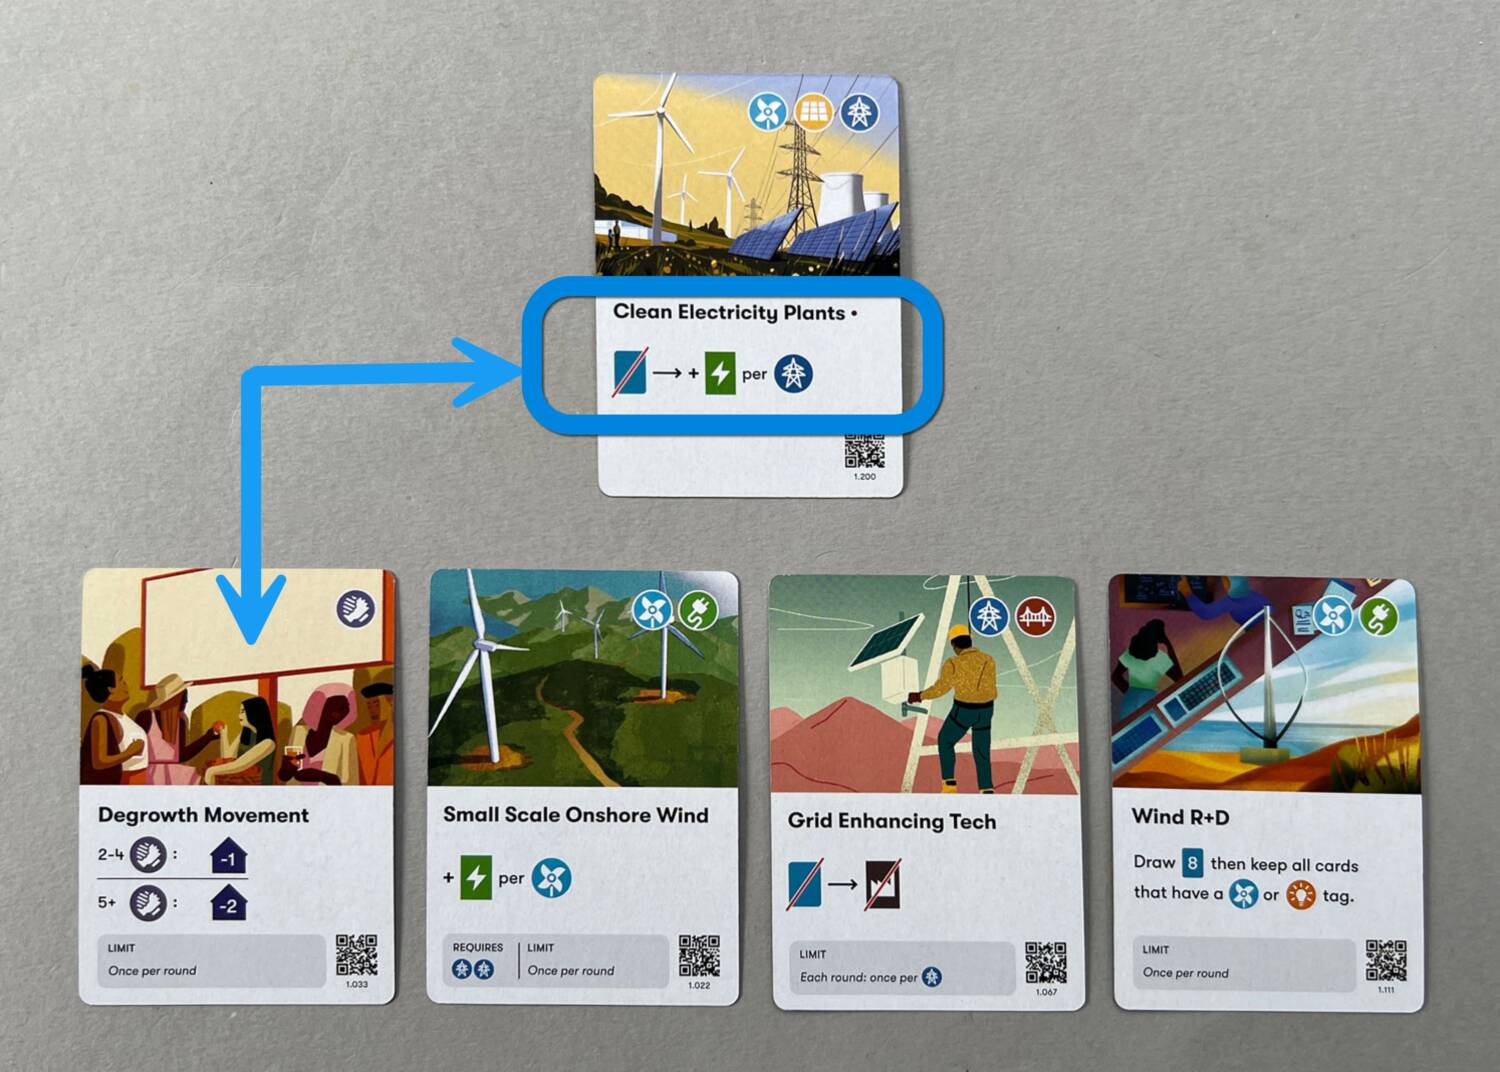 To play the Clean Electricity Plants Local Project, this player discards a card from their hand. In this case, they feel it is the most expendable card in their hand.